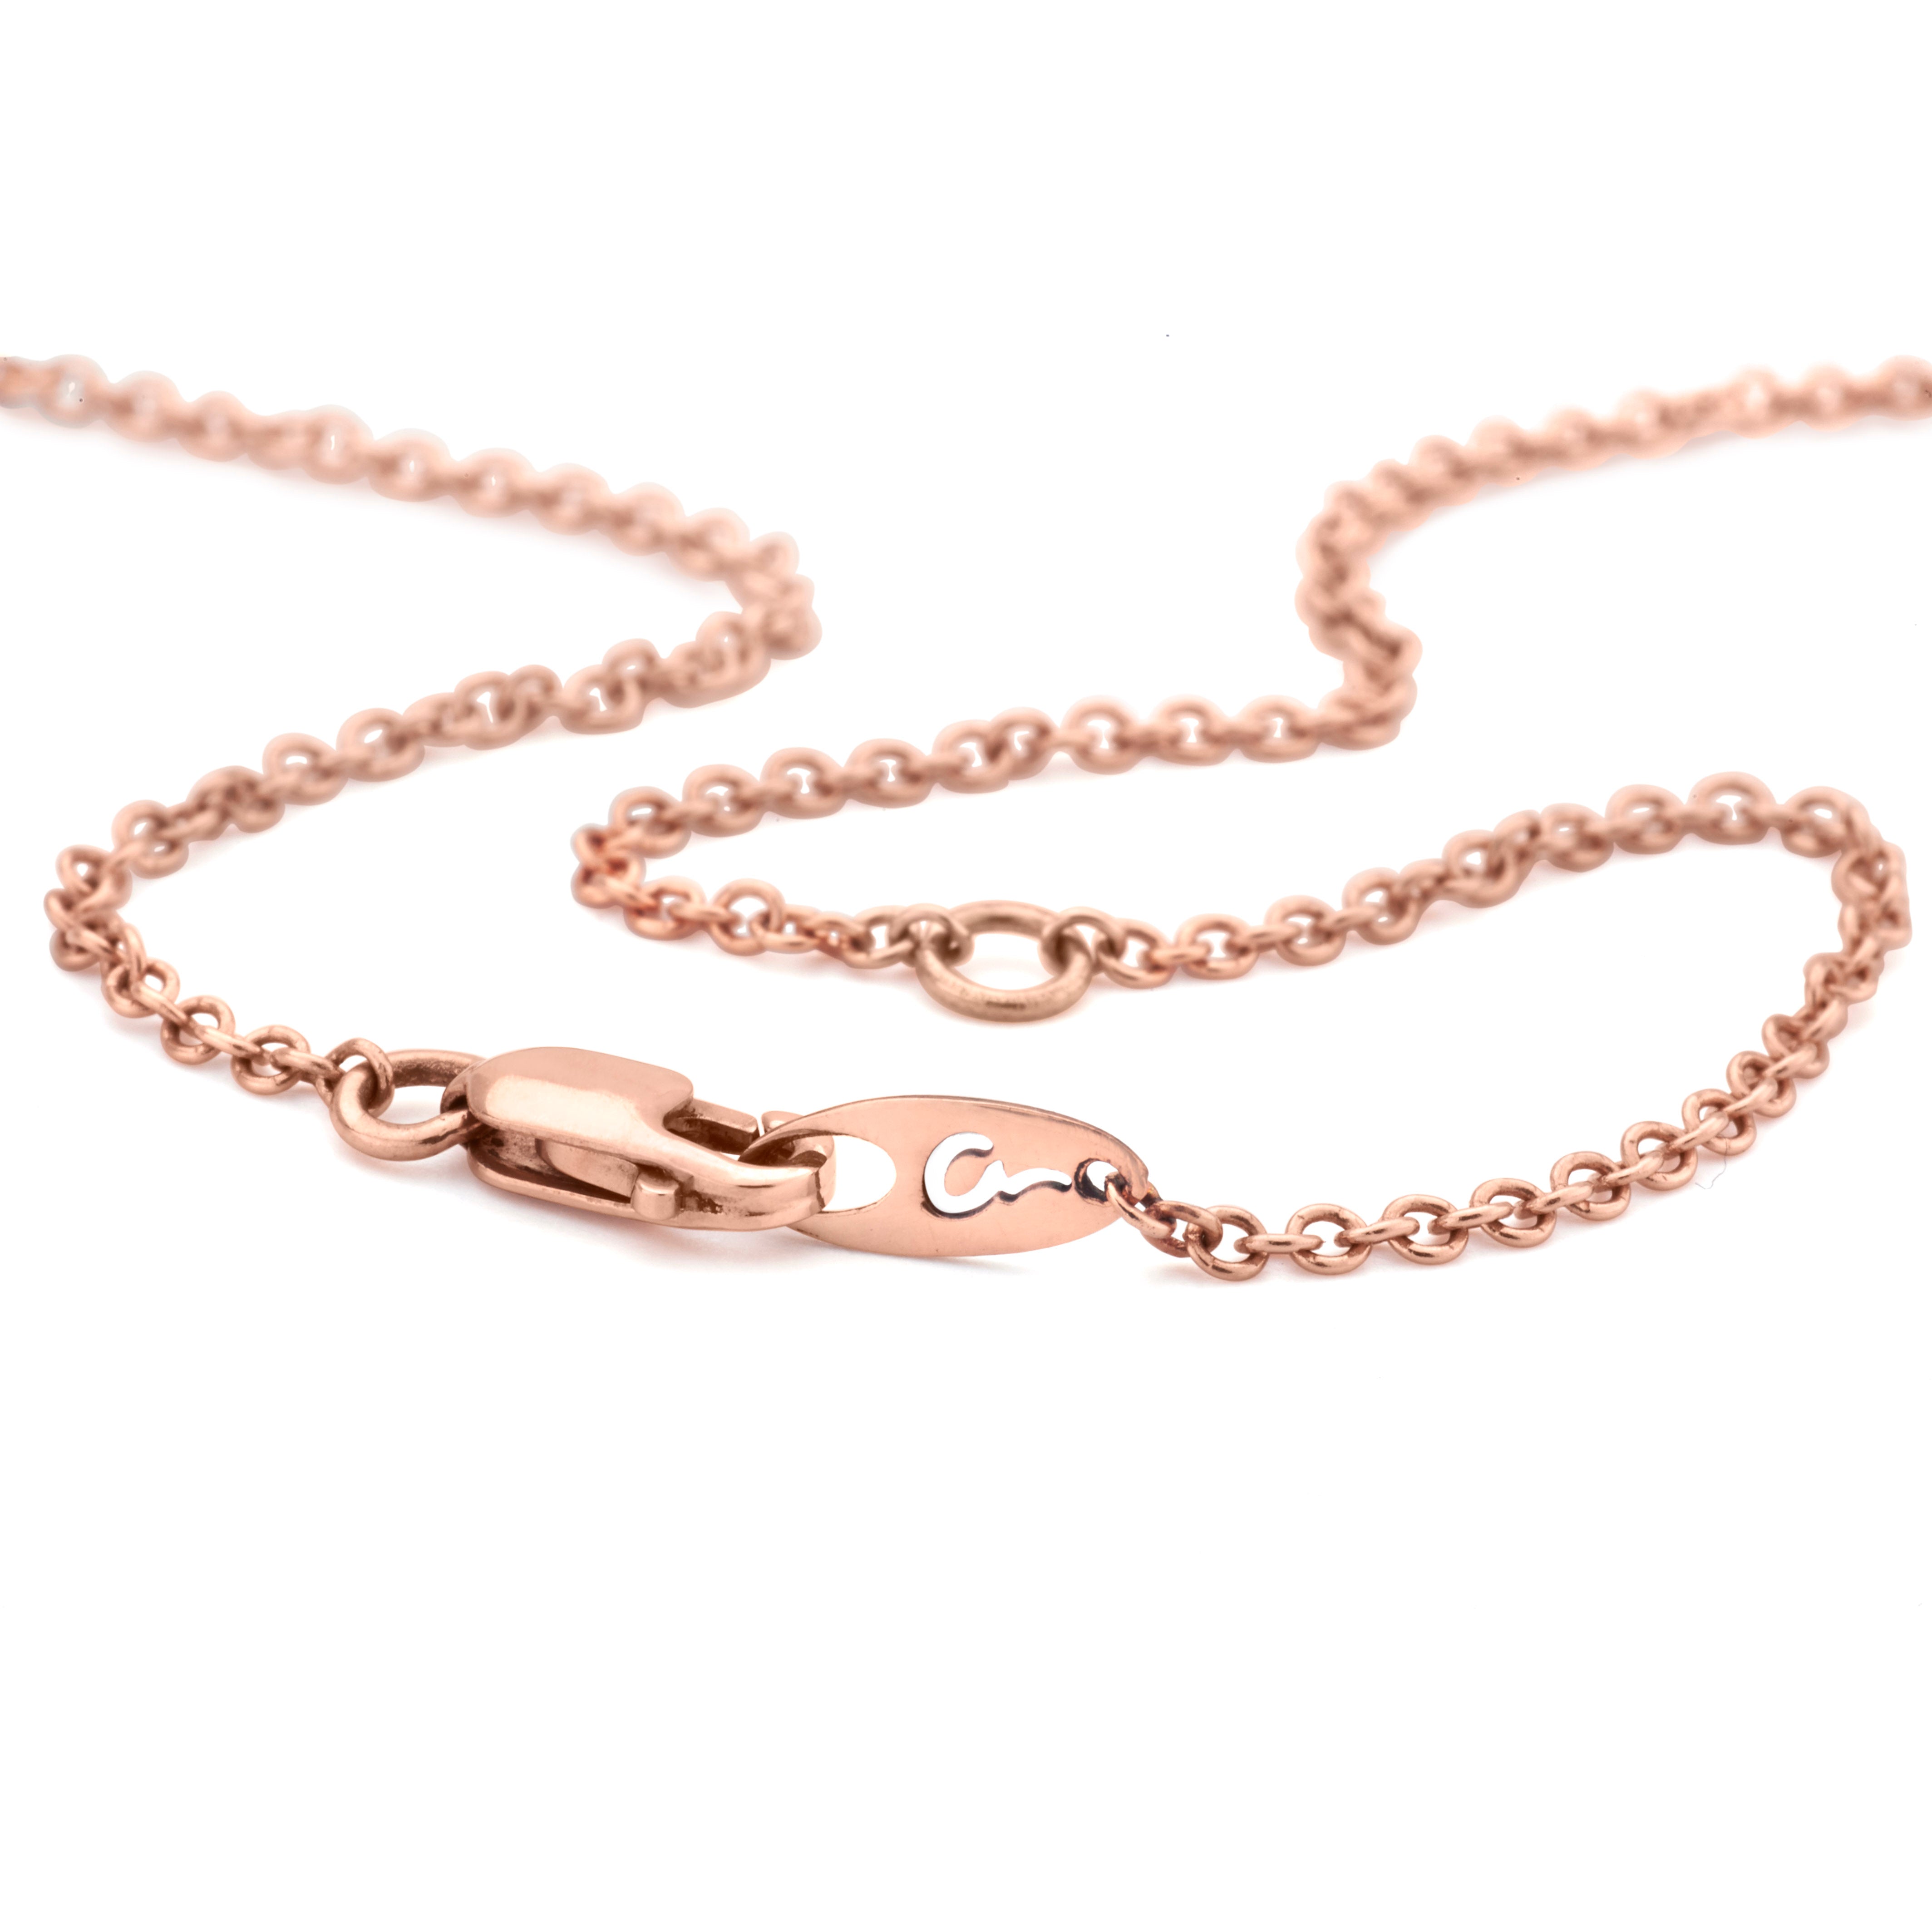 A.JAFFE  16" ROSE GOLD CHAIN WITH 2" EXTENDER